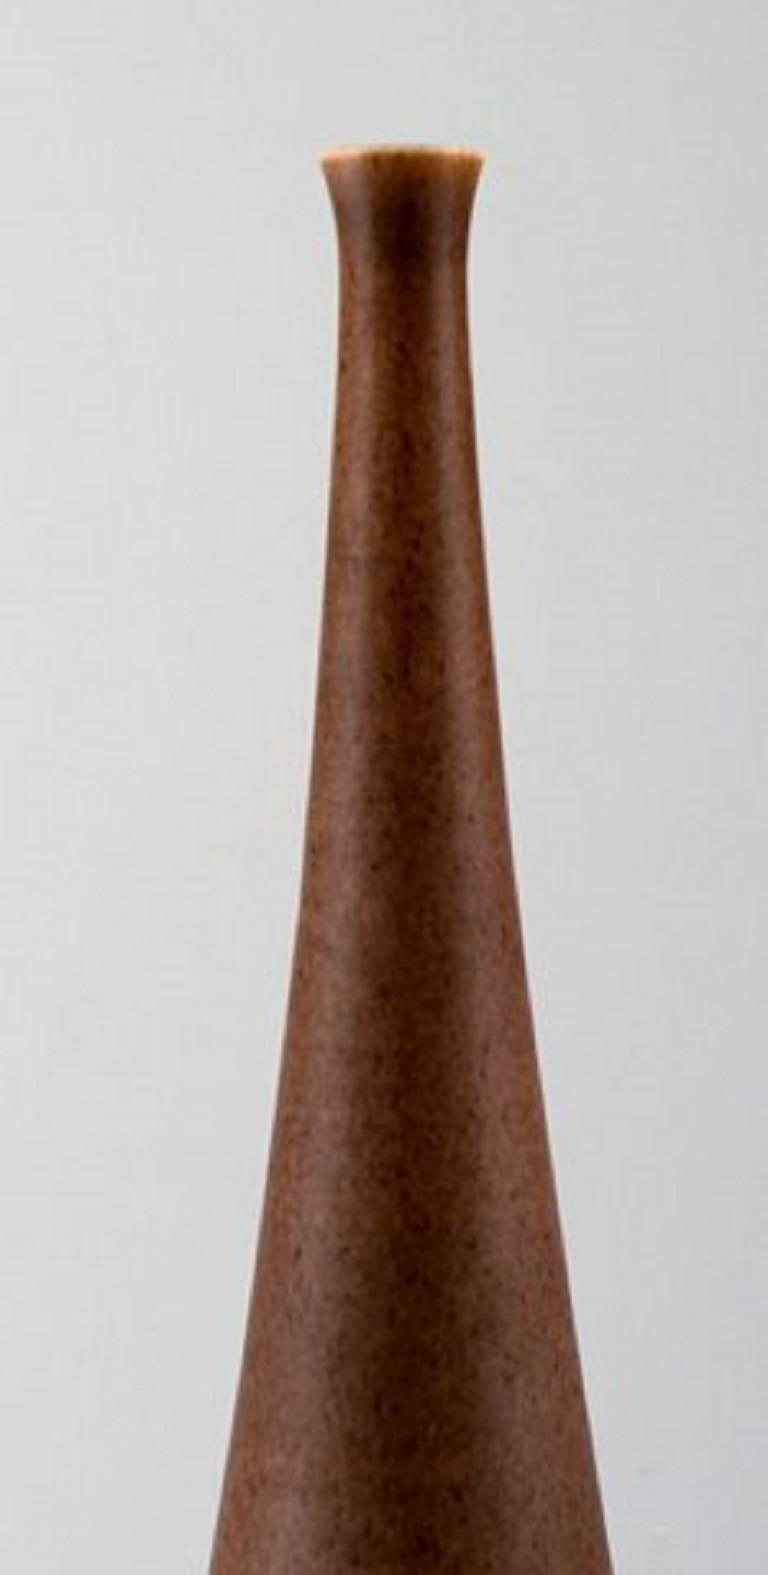 Jacob Siv for Syco, Strömstad, Swedish ceramist.
Large beautiful ceramic vase with narrow neck, glaze in brown shades.
Measures: 36.5 cm.
Stamped.
In perfect condition.